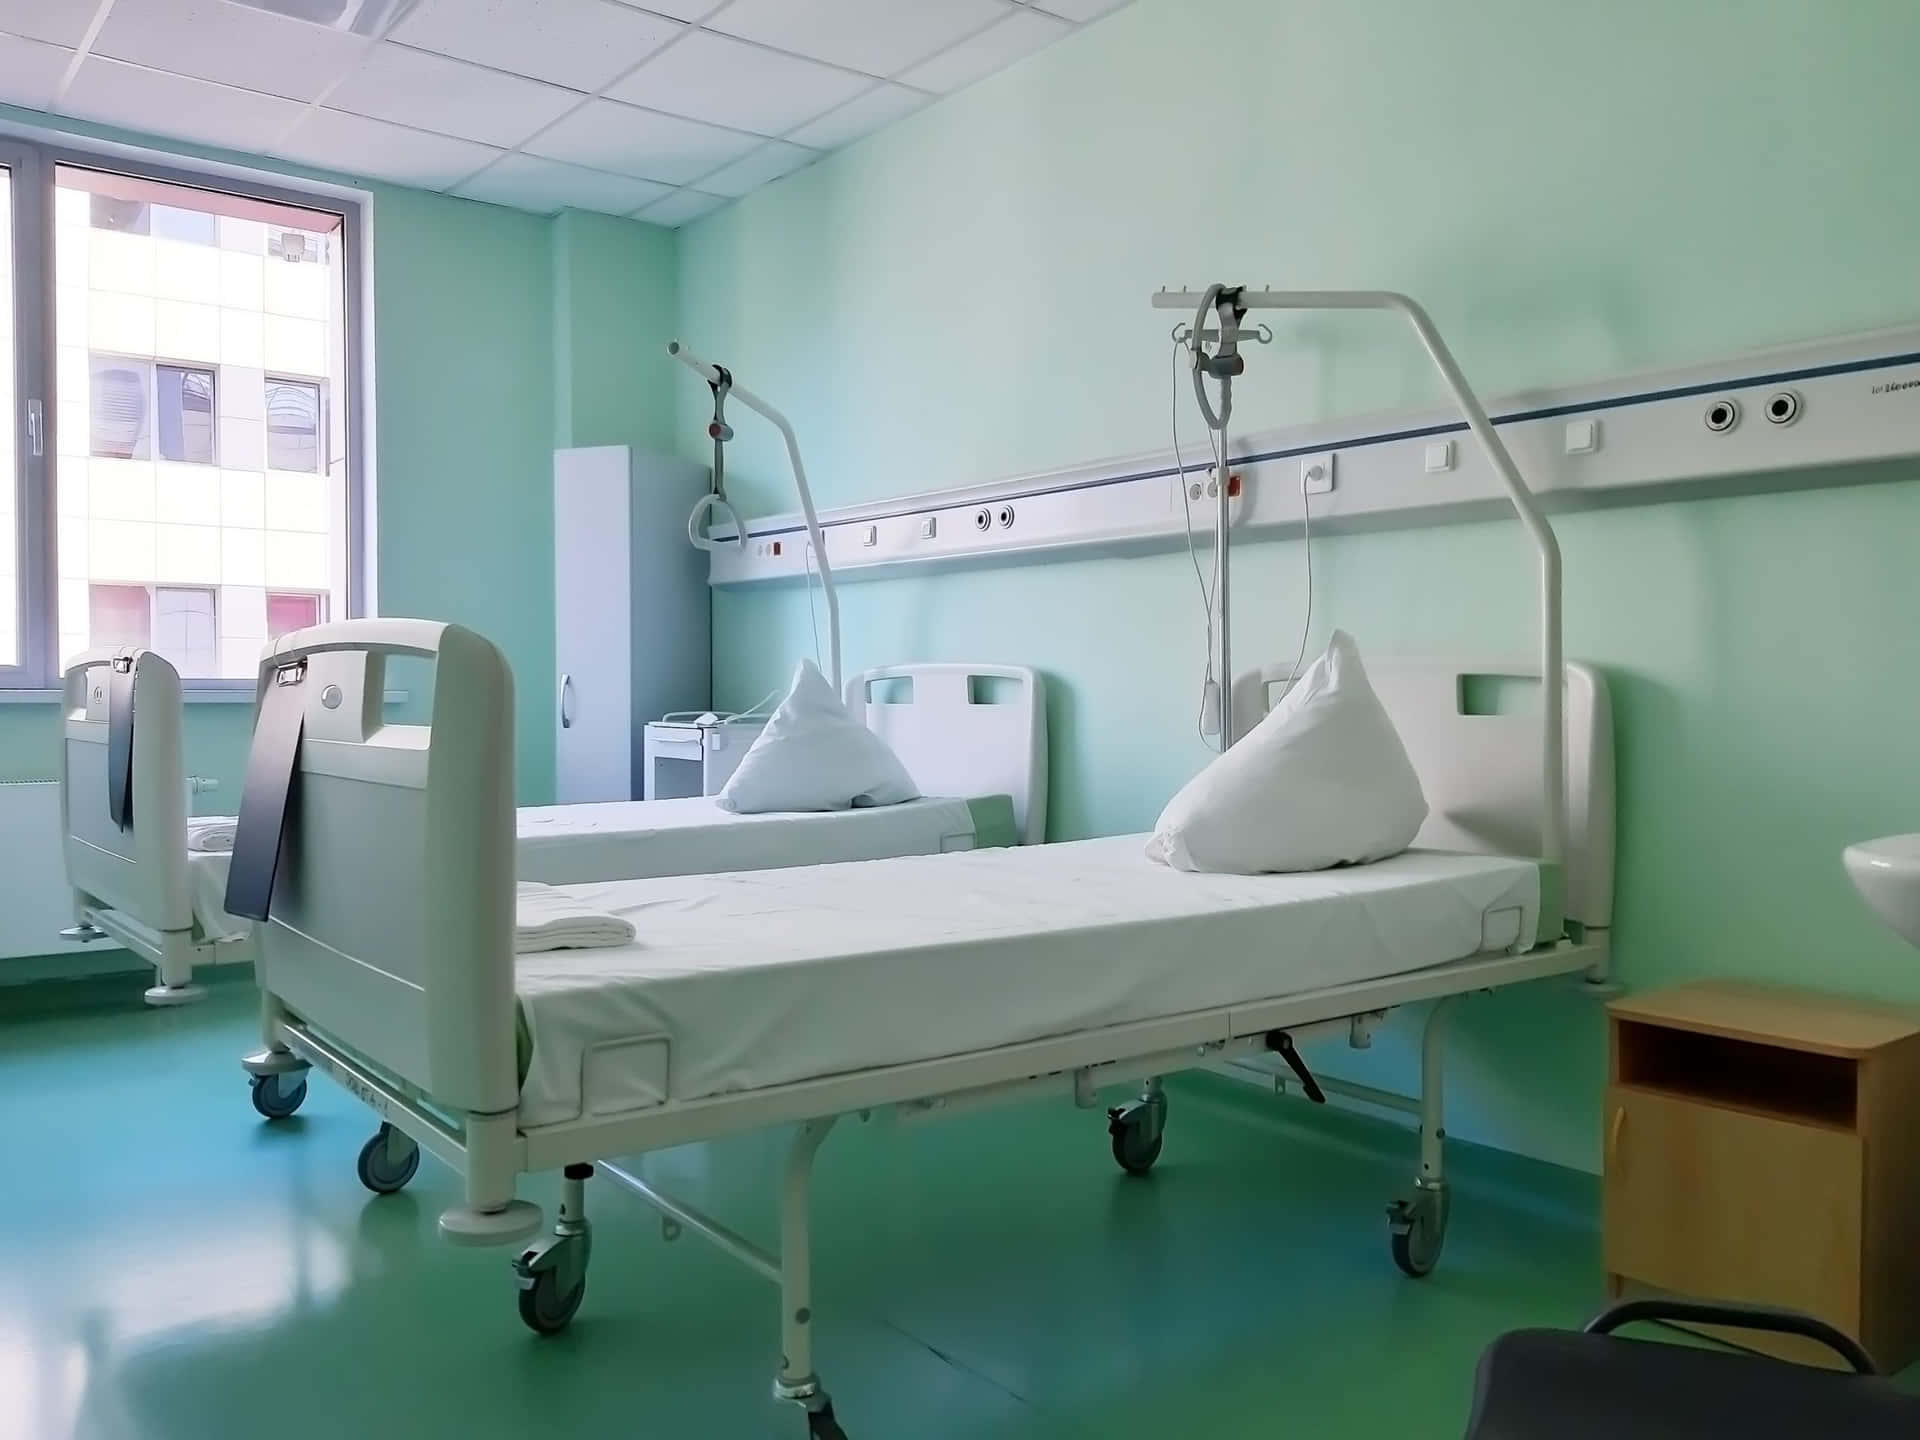 "Modern Hospital with State-of-the-art Technologies"